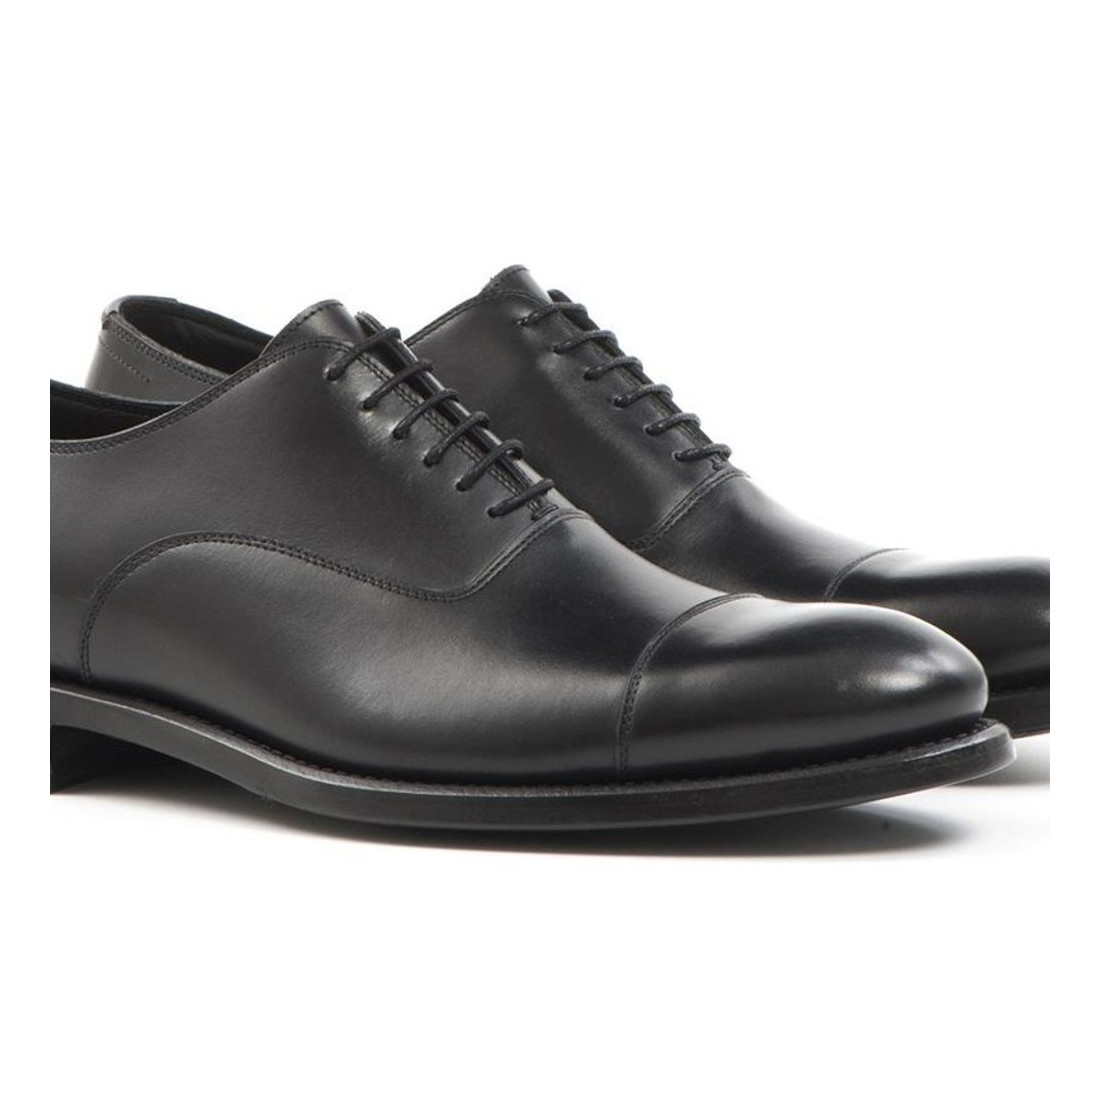 Men's Jerold Wilton oxford shoes in black leather